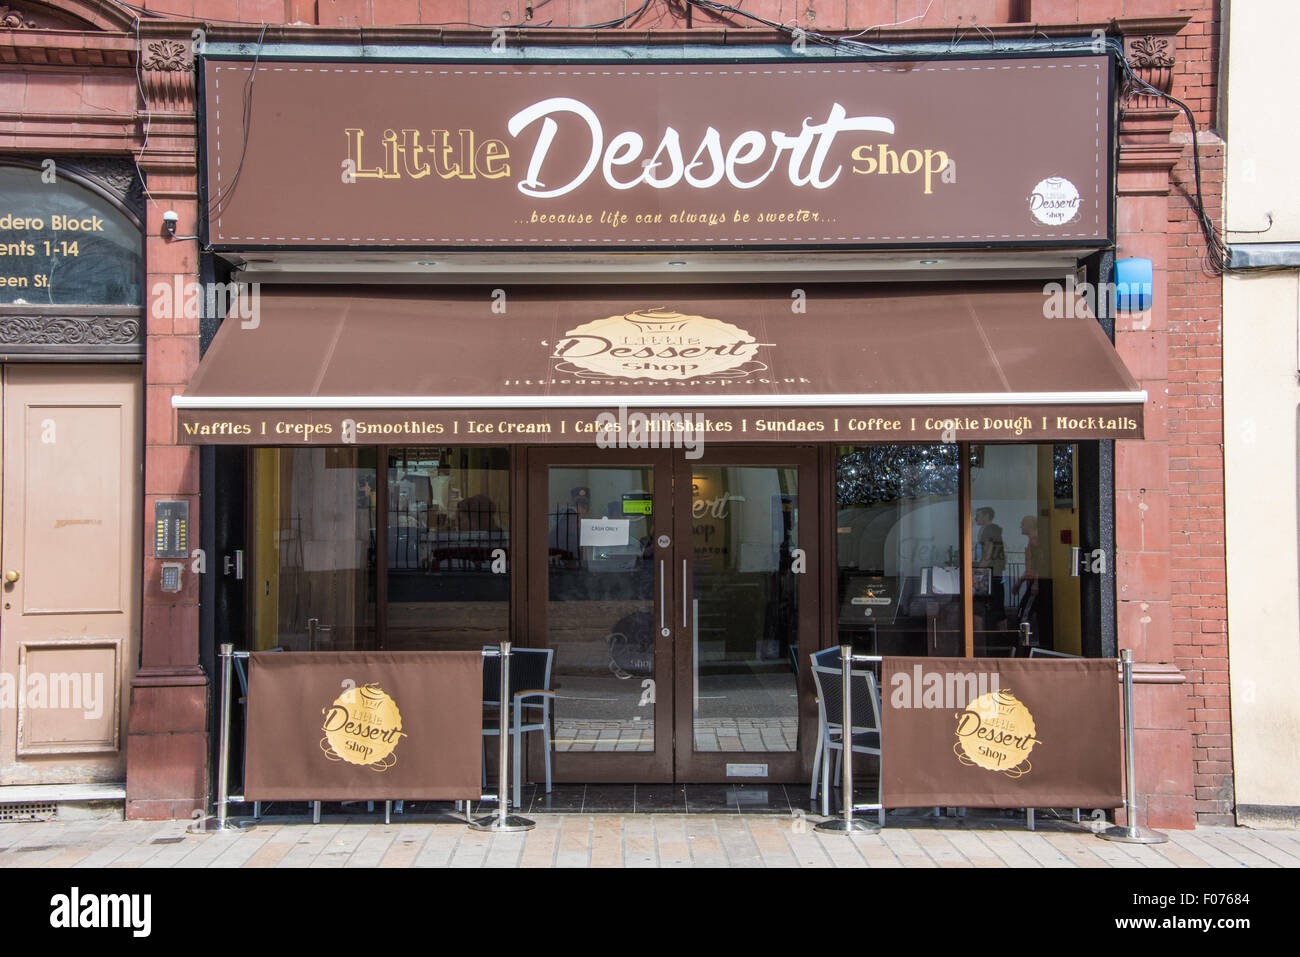 Little Dessert Shop selling delicious cakes, puddings and pastries in Wolverhampton West Midlands UK Stock Photo